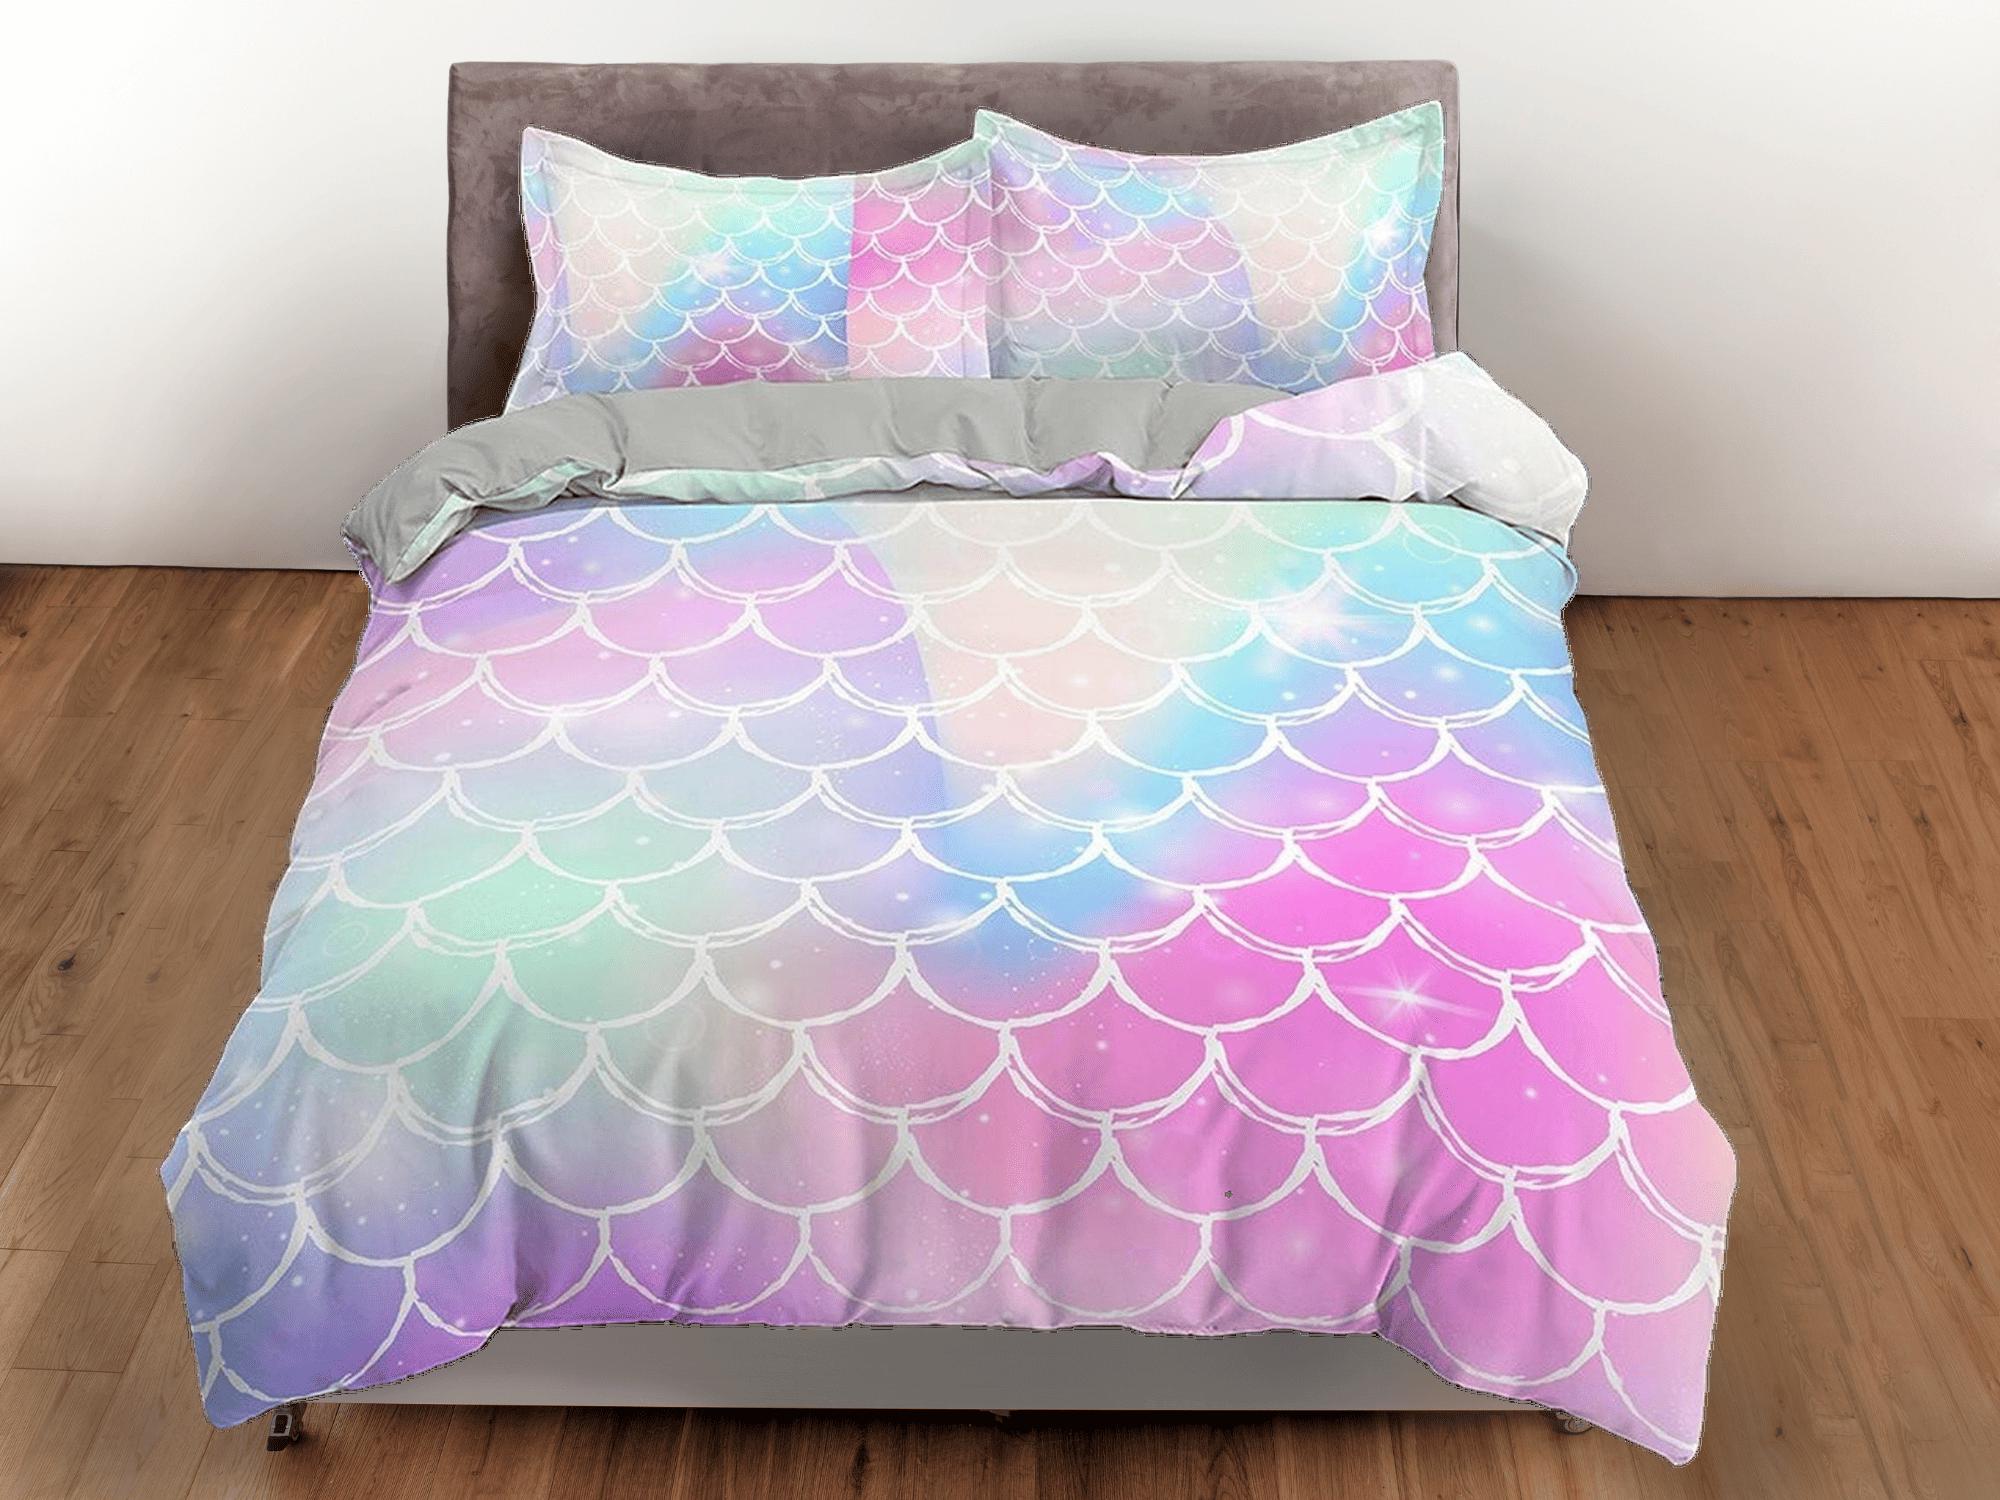 daintyduvet Pastel colored mermaid scales rainbow toddler bedding, duvet cover for nursery kids, crib bedding, baby zipper bedding, king queen full twin